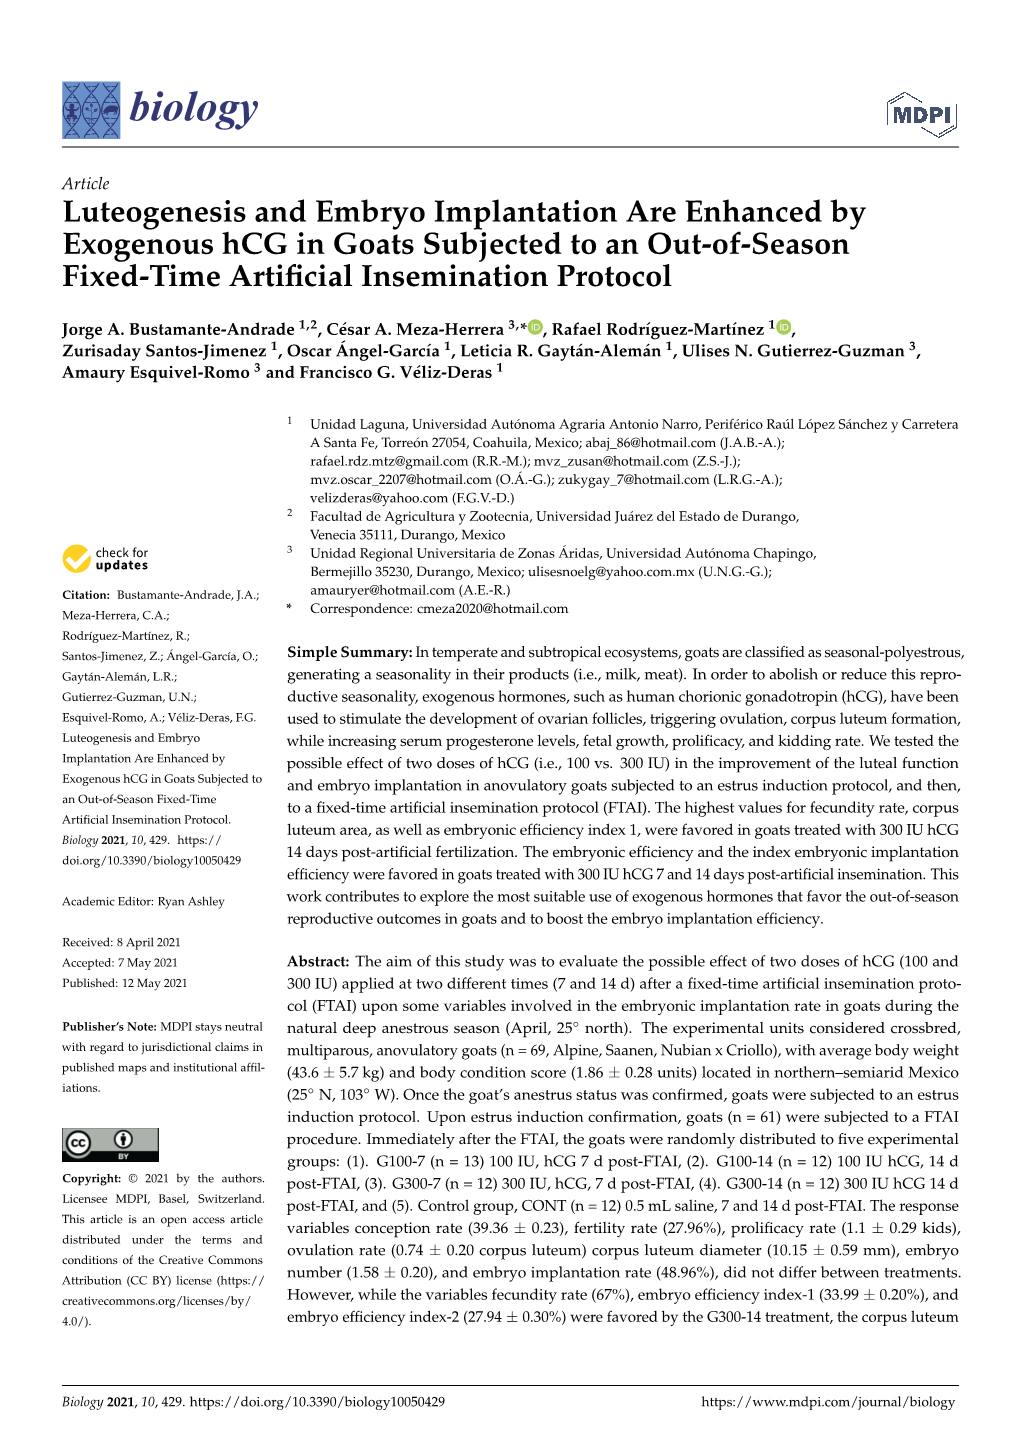 Luteogenesis and Embryo Implantation Are Enhanced by Exogenous Hcg in Goats Subjected to an Out-Of-Season Fixed-Time Artiﬁcial Insemination Protocol